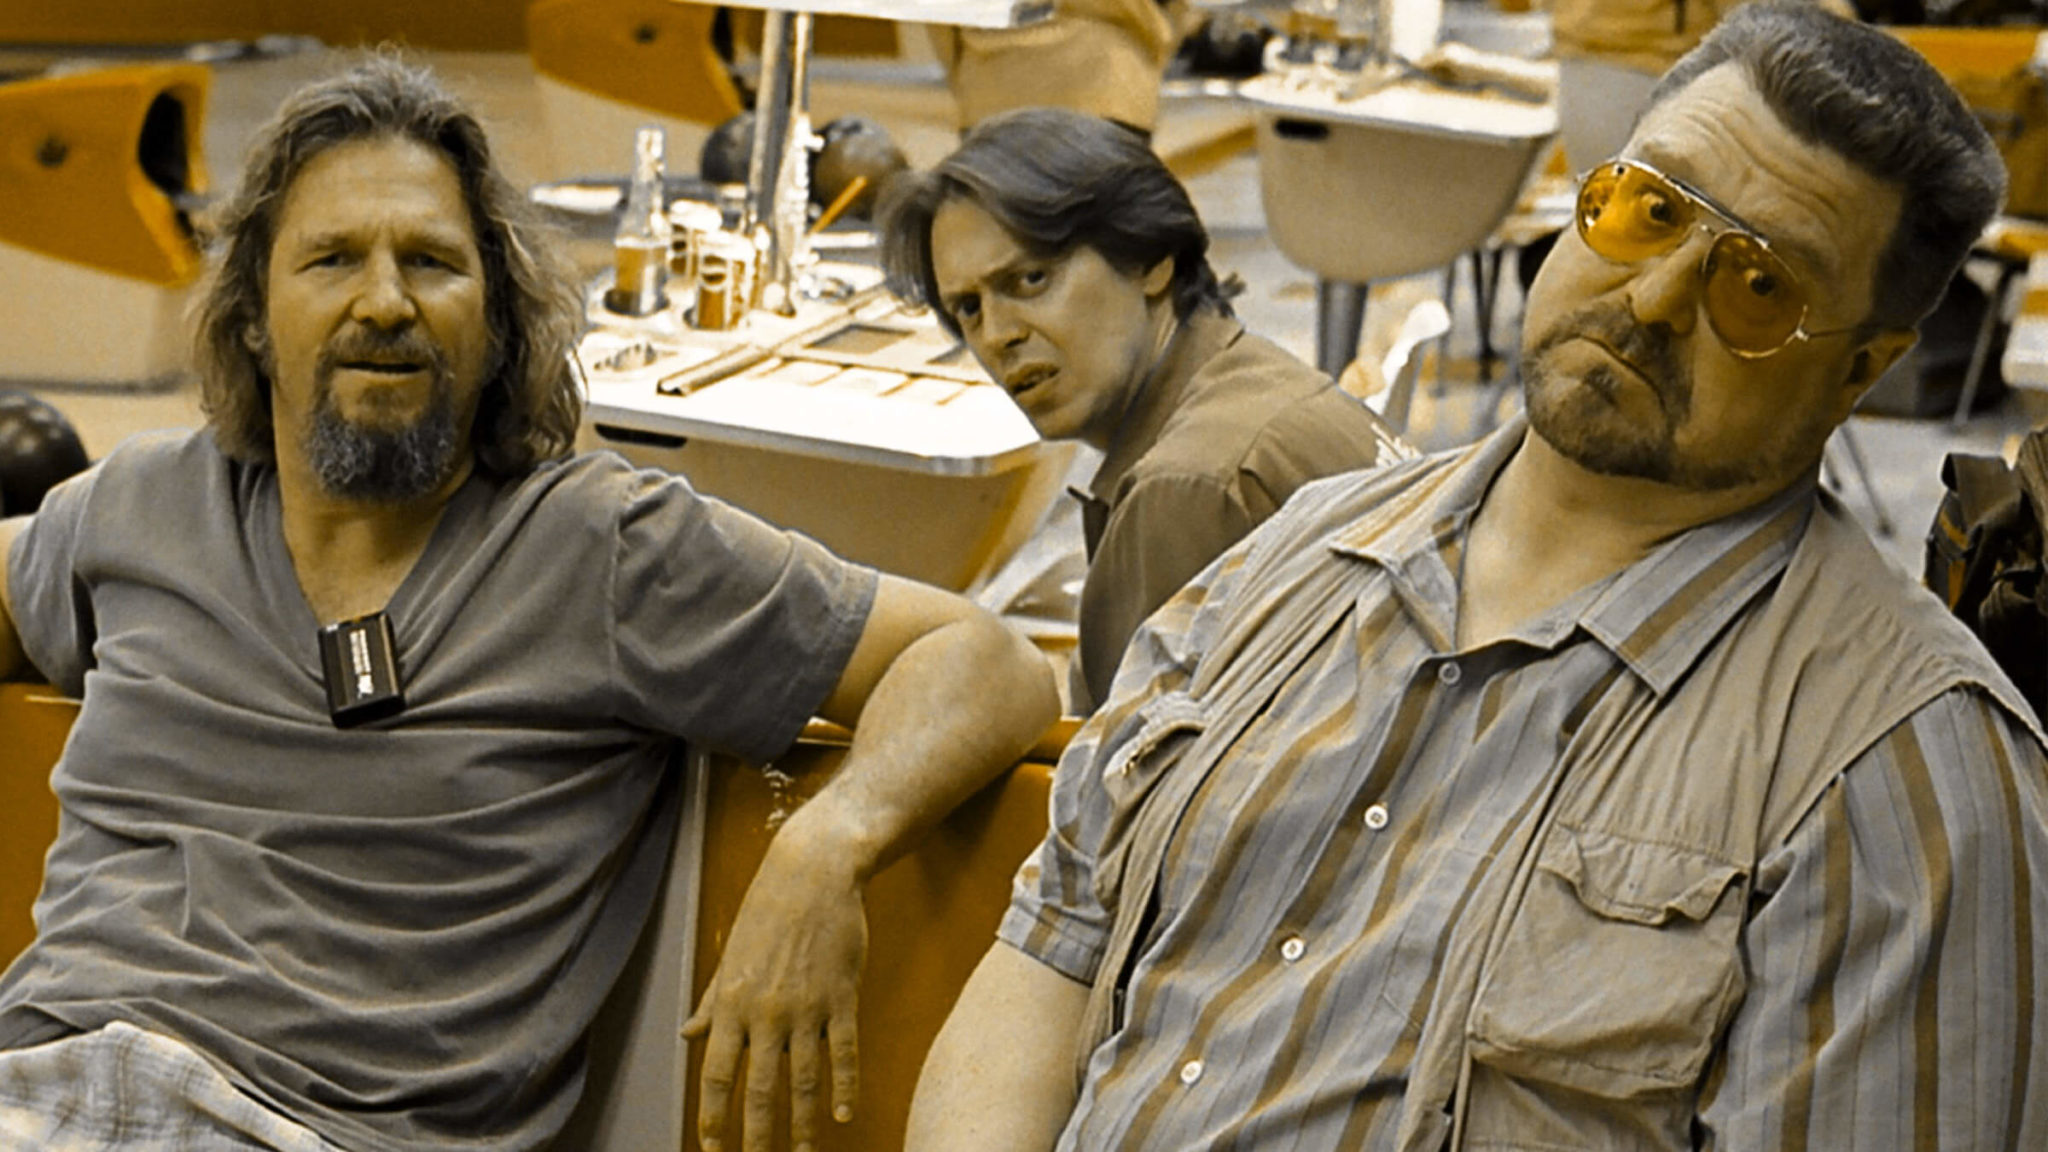 15 Movies Screenwriters Should Watch to Study Dialogue_film still from The Big Lebowski